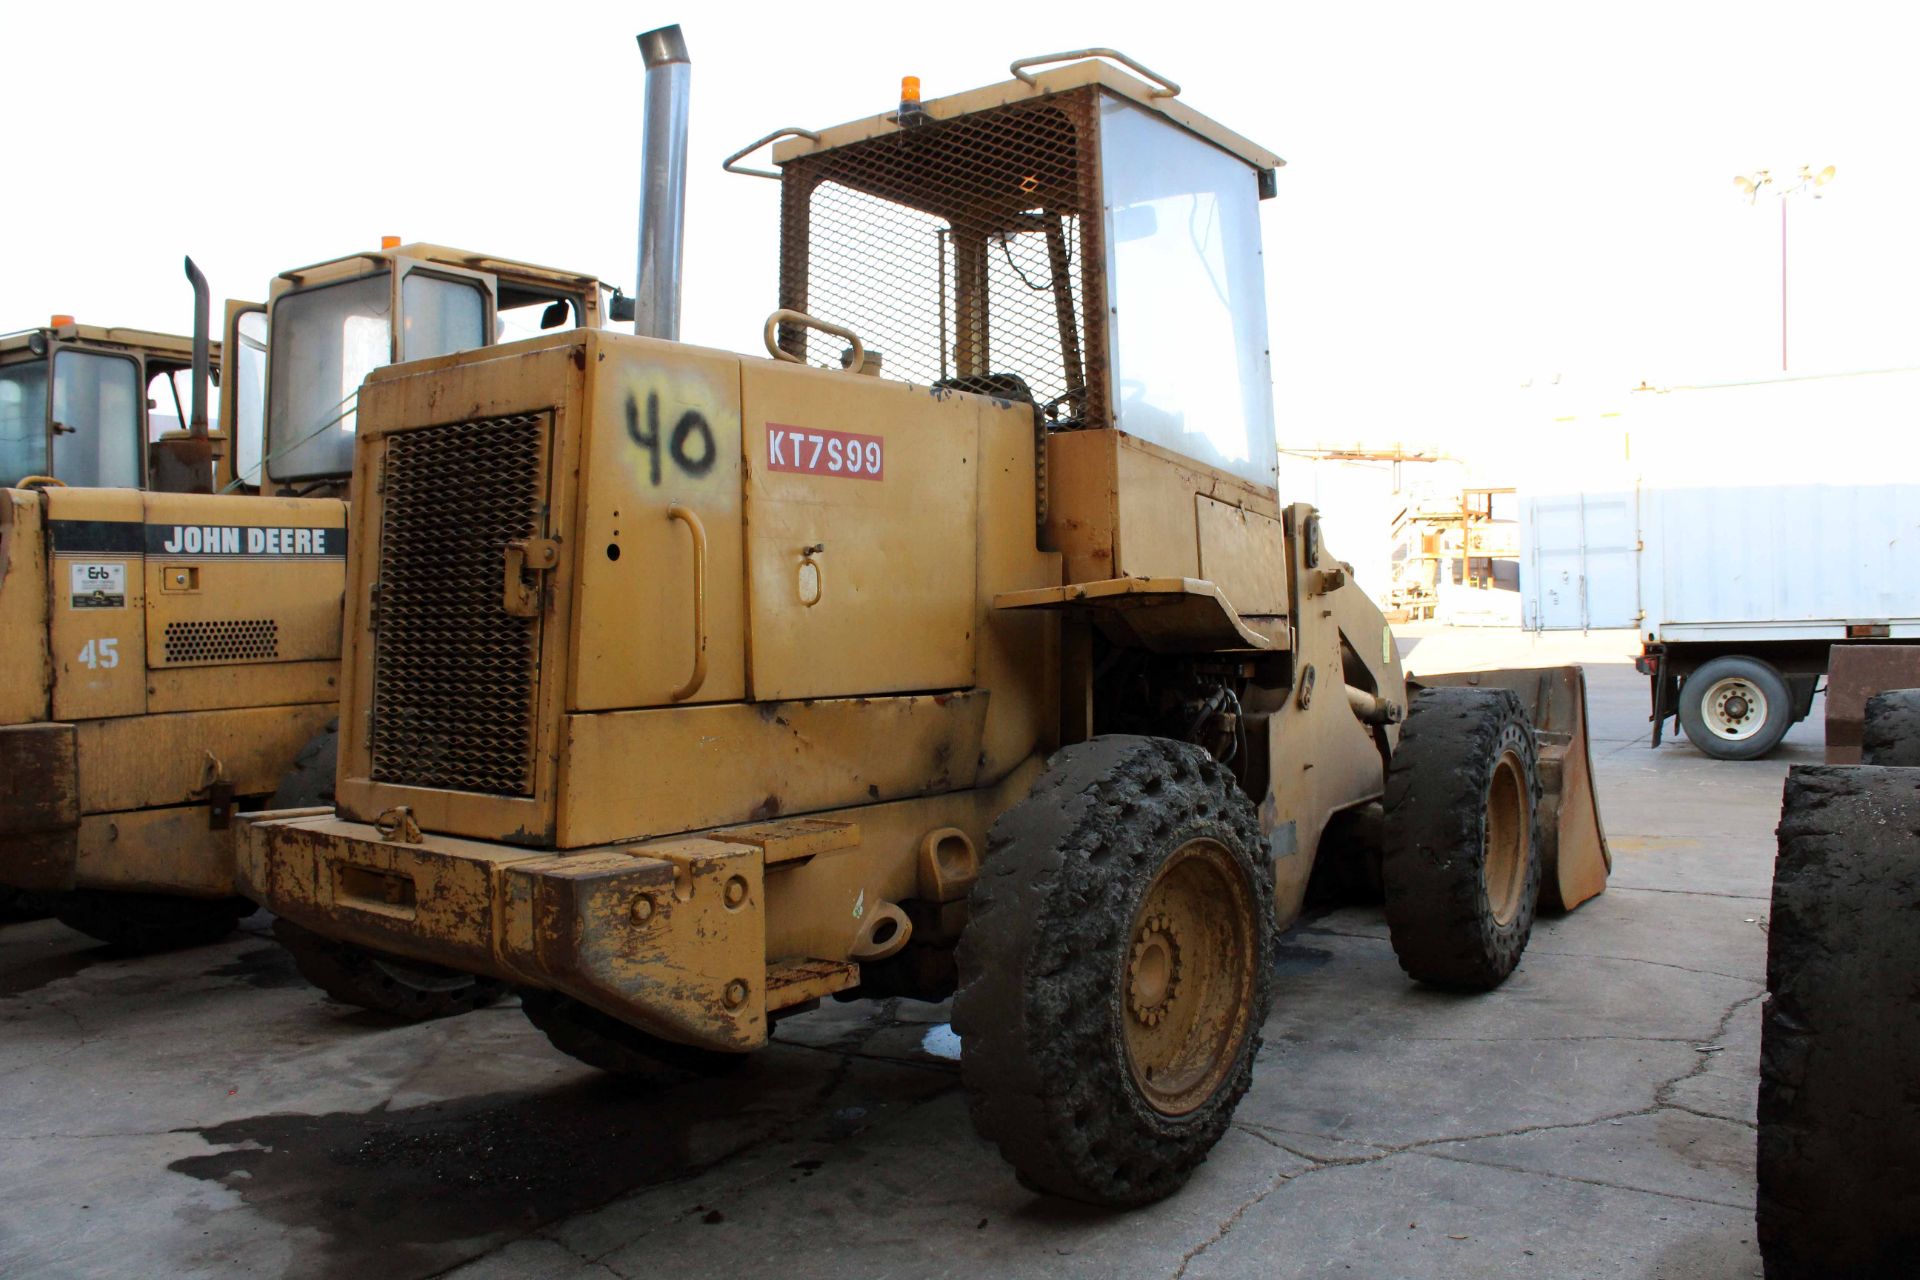 ARTICULATED FRONT END LOADER, CATERPILLAR MDL. H100XL, S/N 6MN00796 (Unit No. 40)